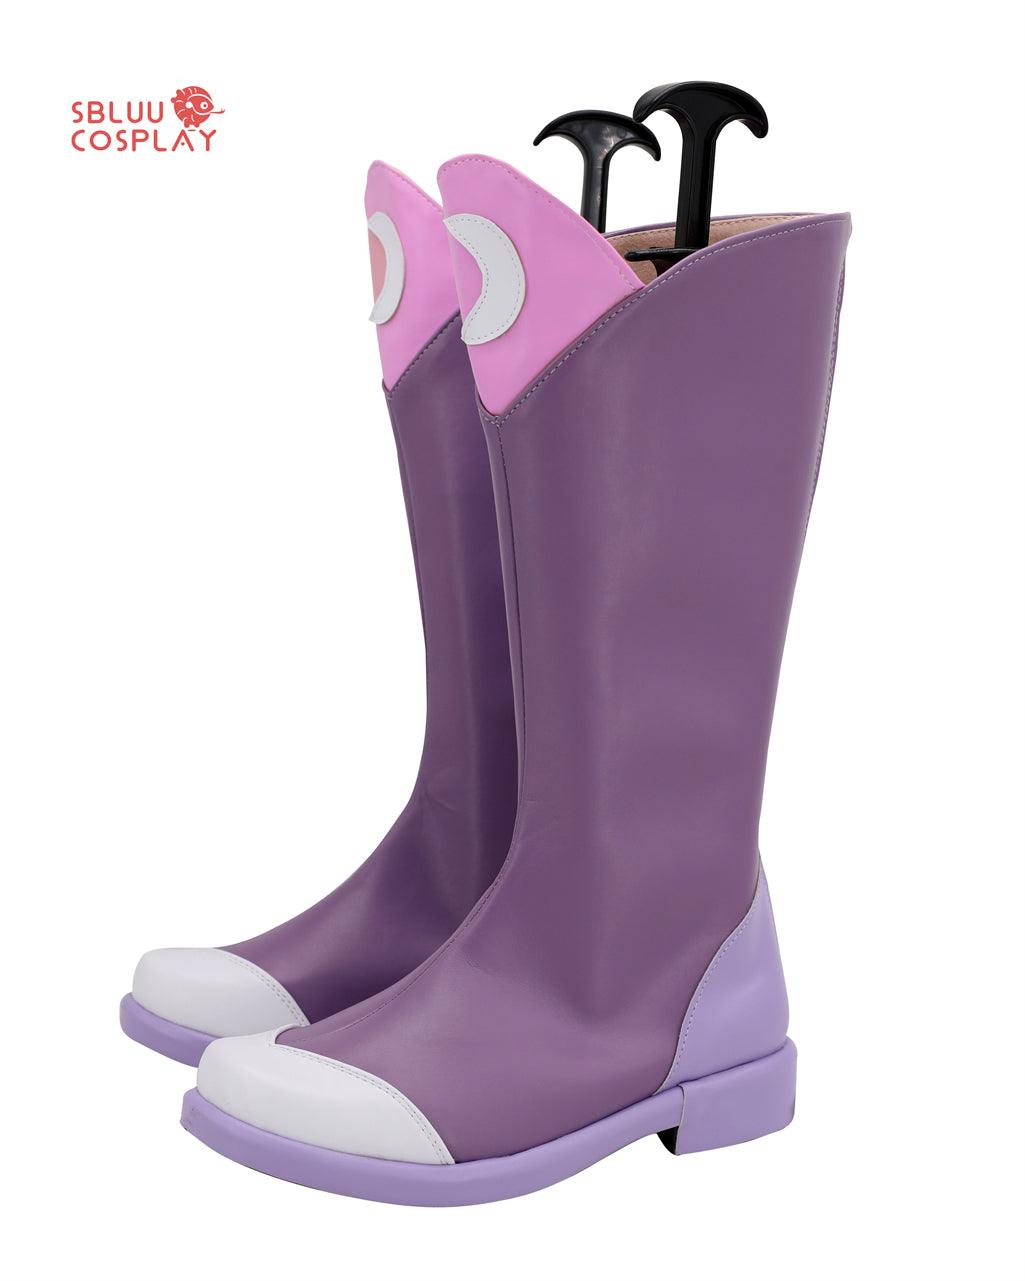 She Ra Princess of Power Glimmer Cosplay Shoes Custom Made Boots - SBluuCosplay